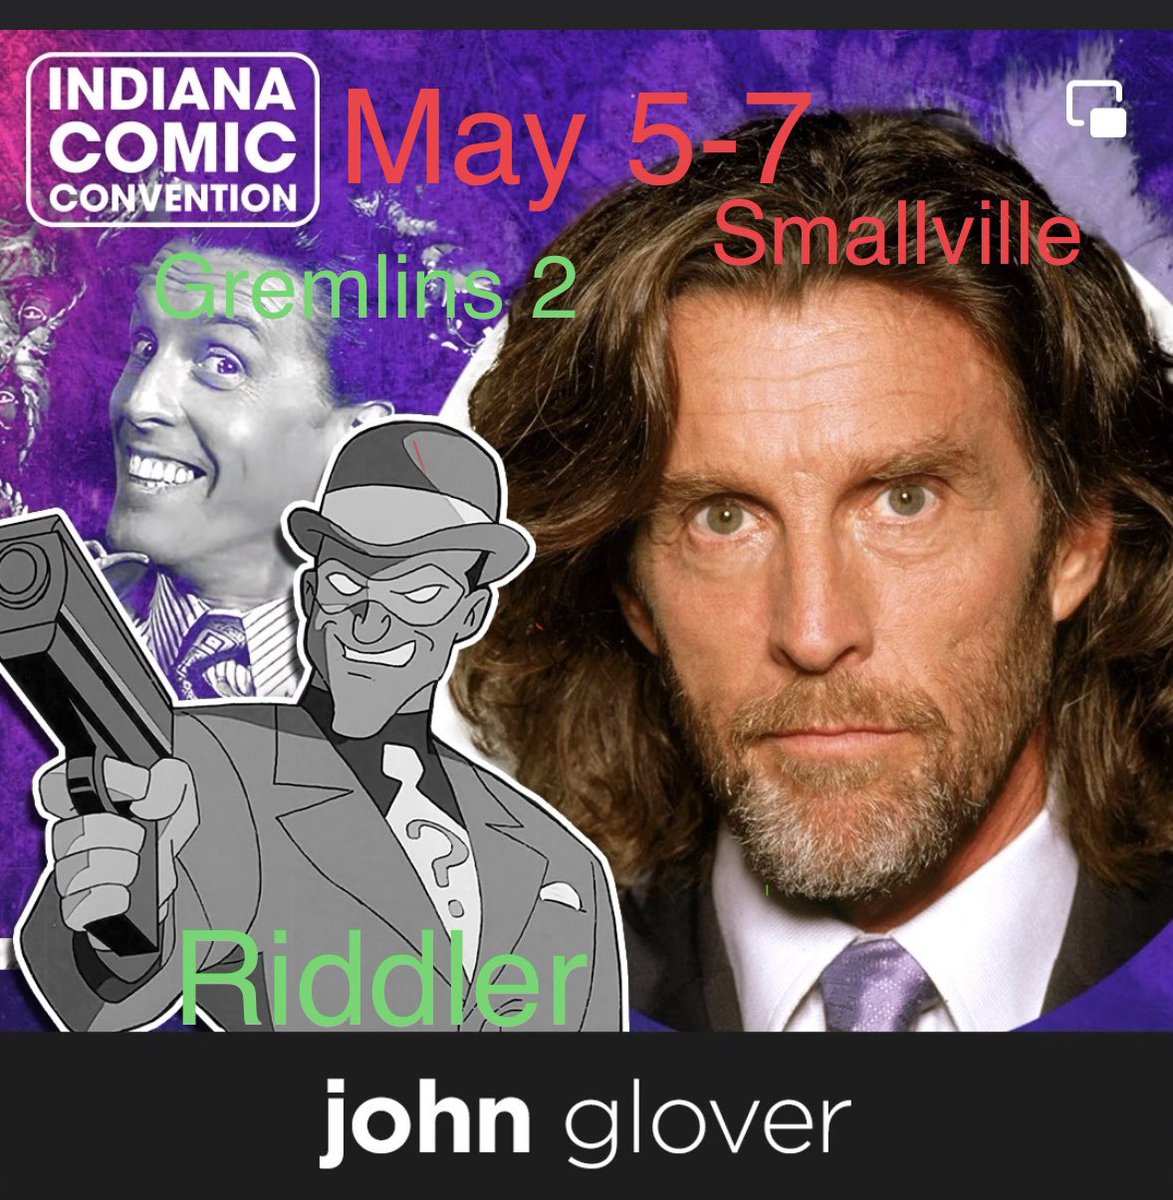 And let’s keep the summer fun going! Coming to @Indiana__CC this may 5-7 with a friend ;) #riddler #batman #roguesgallery #lionel #luthor #smallville #talkville #superman #gremlins #scrooged #feartwd